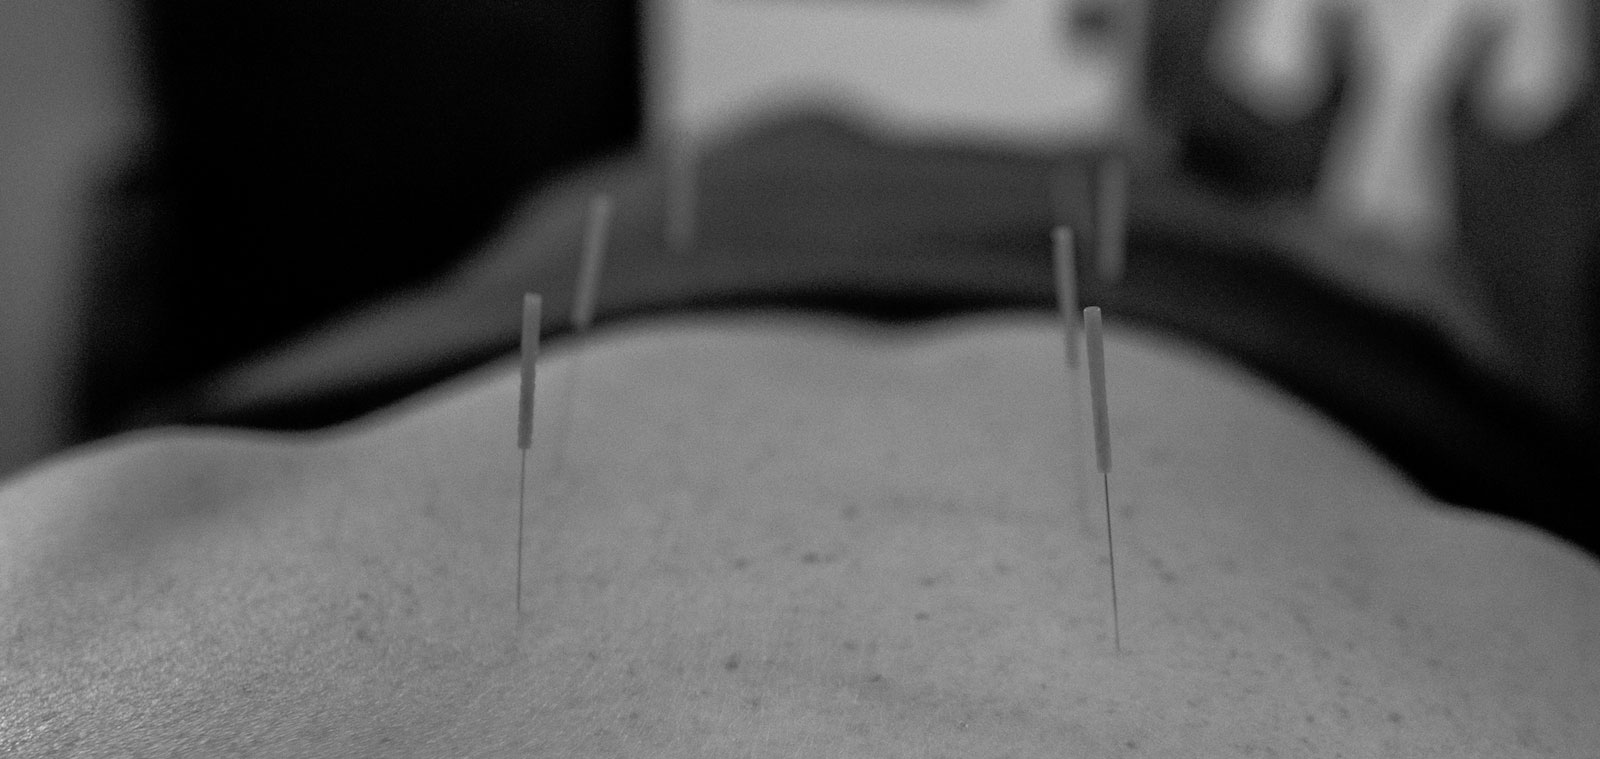 acupuncture needles in back